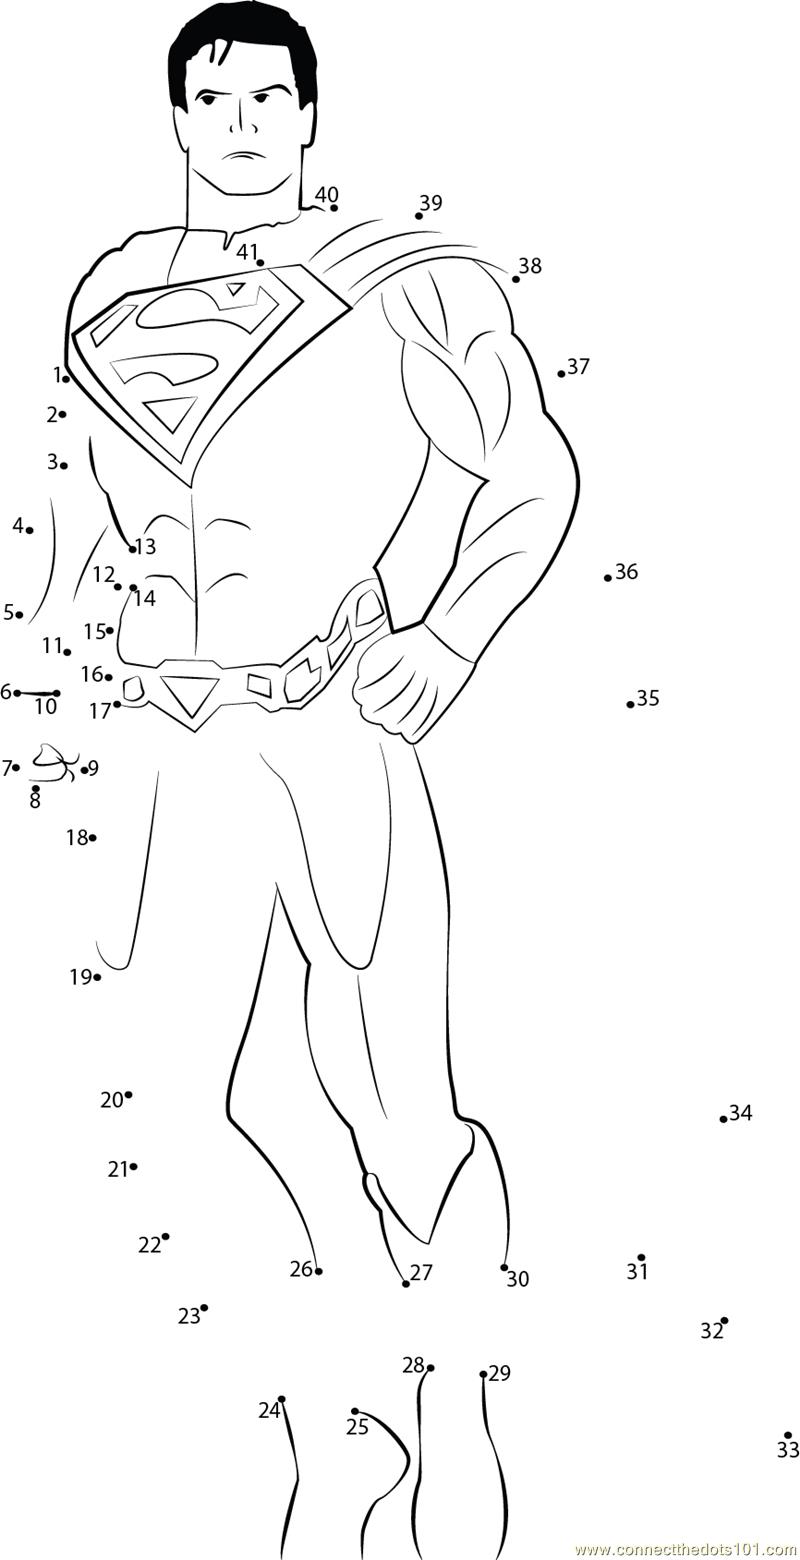 Superman the hero dot to dot printable worksheet - Connect The Dots